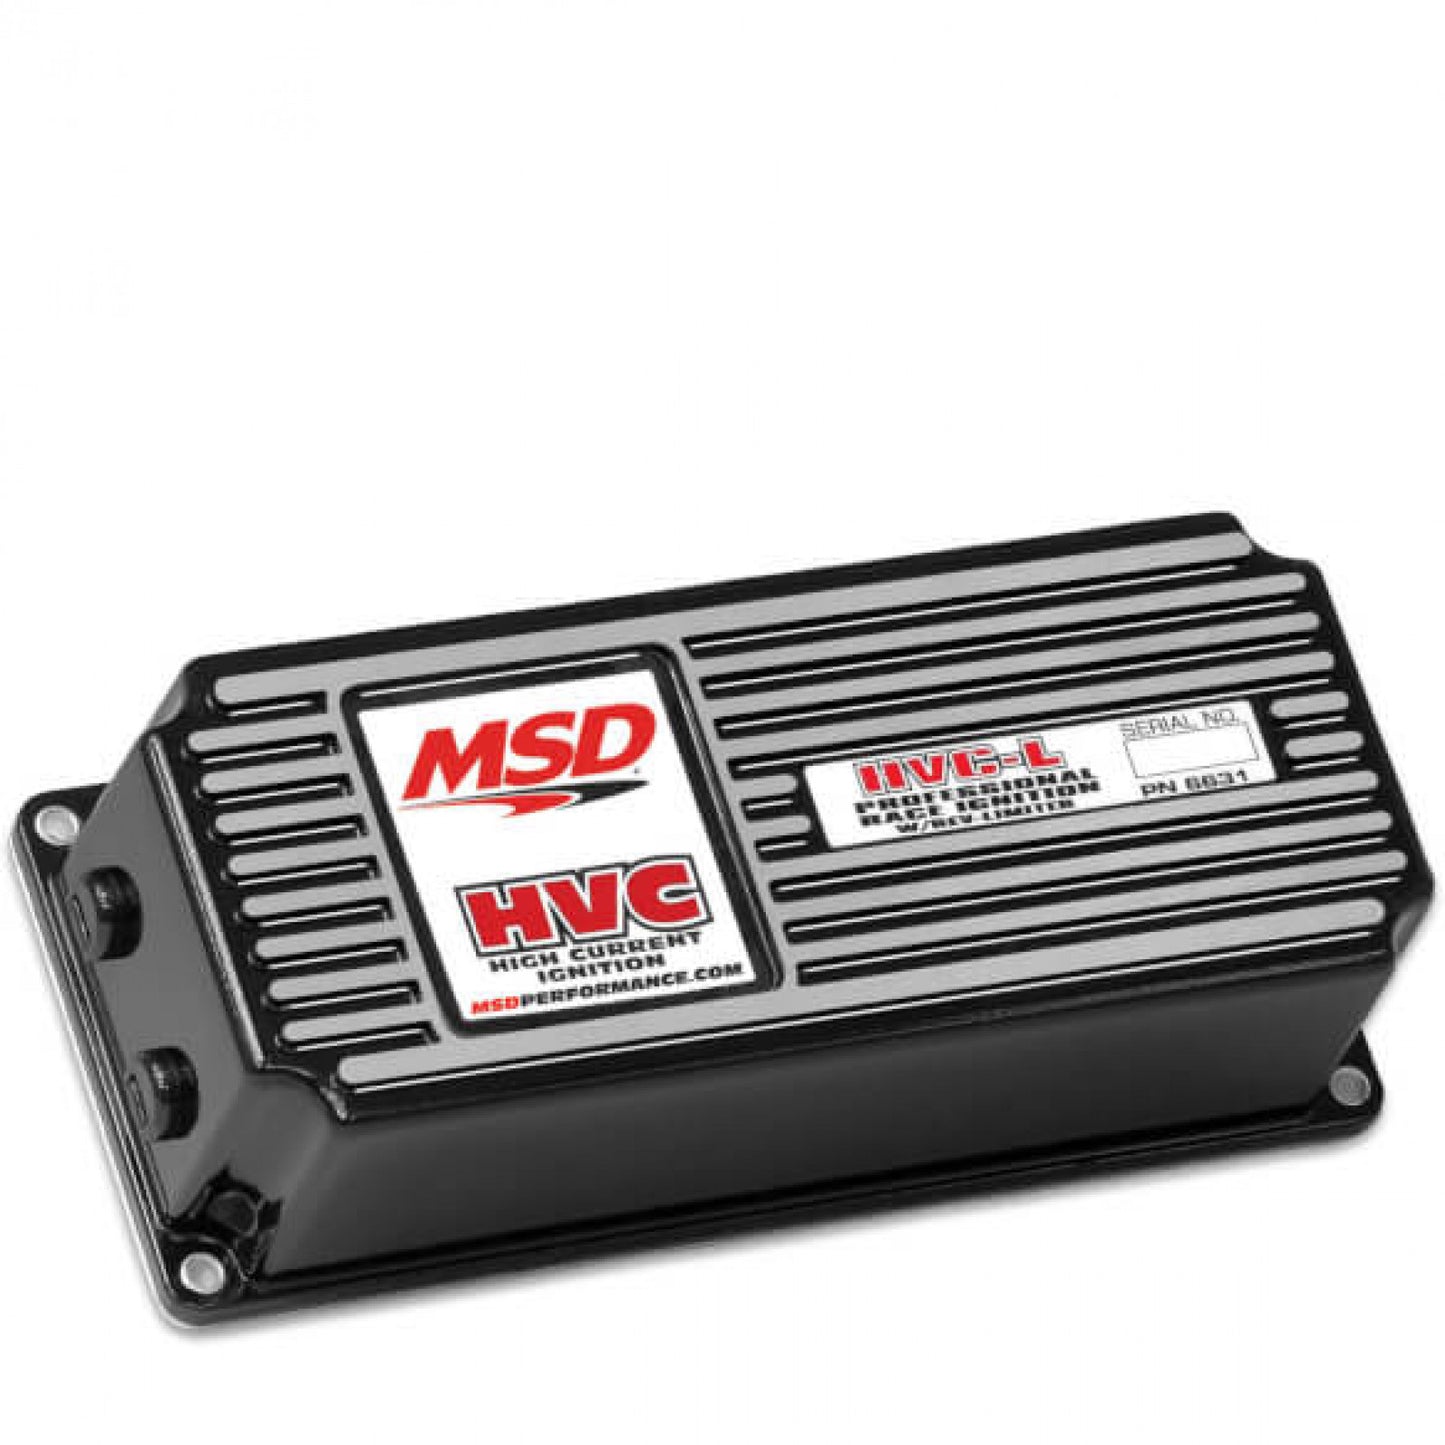 MSD 6 HVC, Professional Race with Fast Rev Limiter '6631